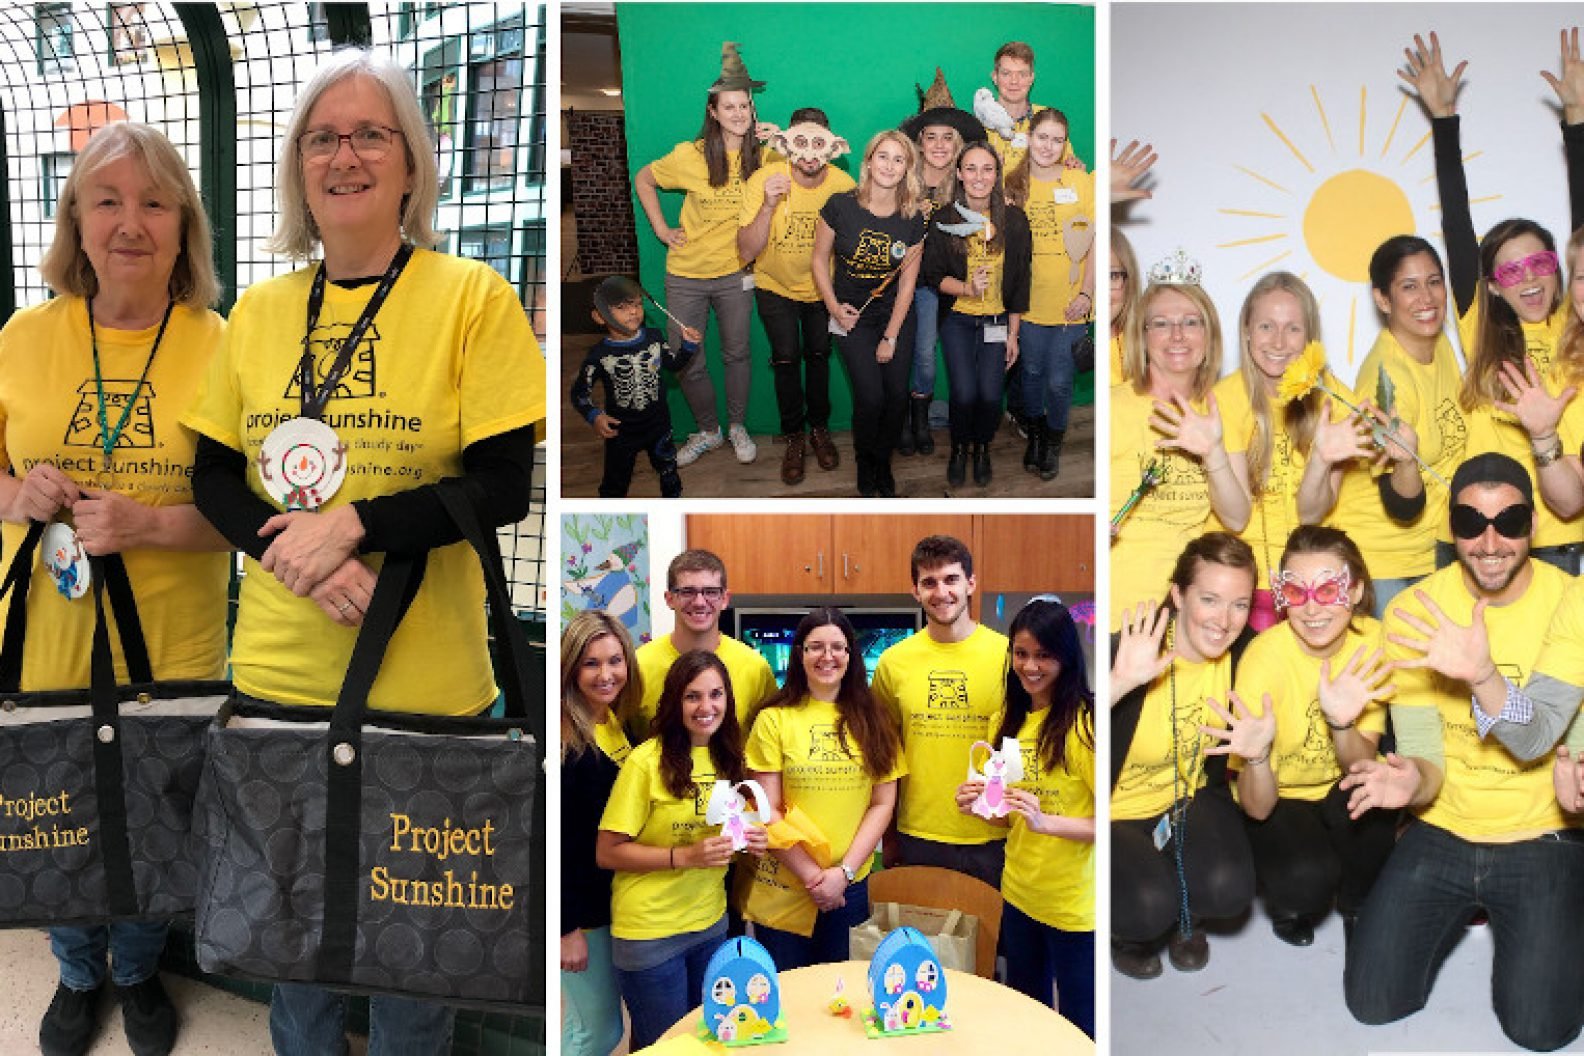 Join Project Sunshine as a Community Volunteer